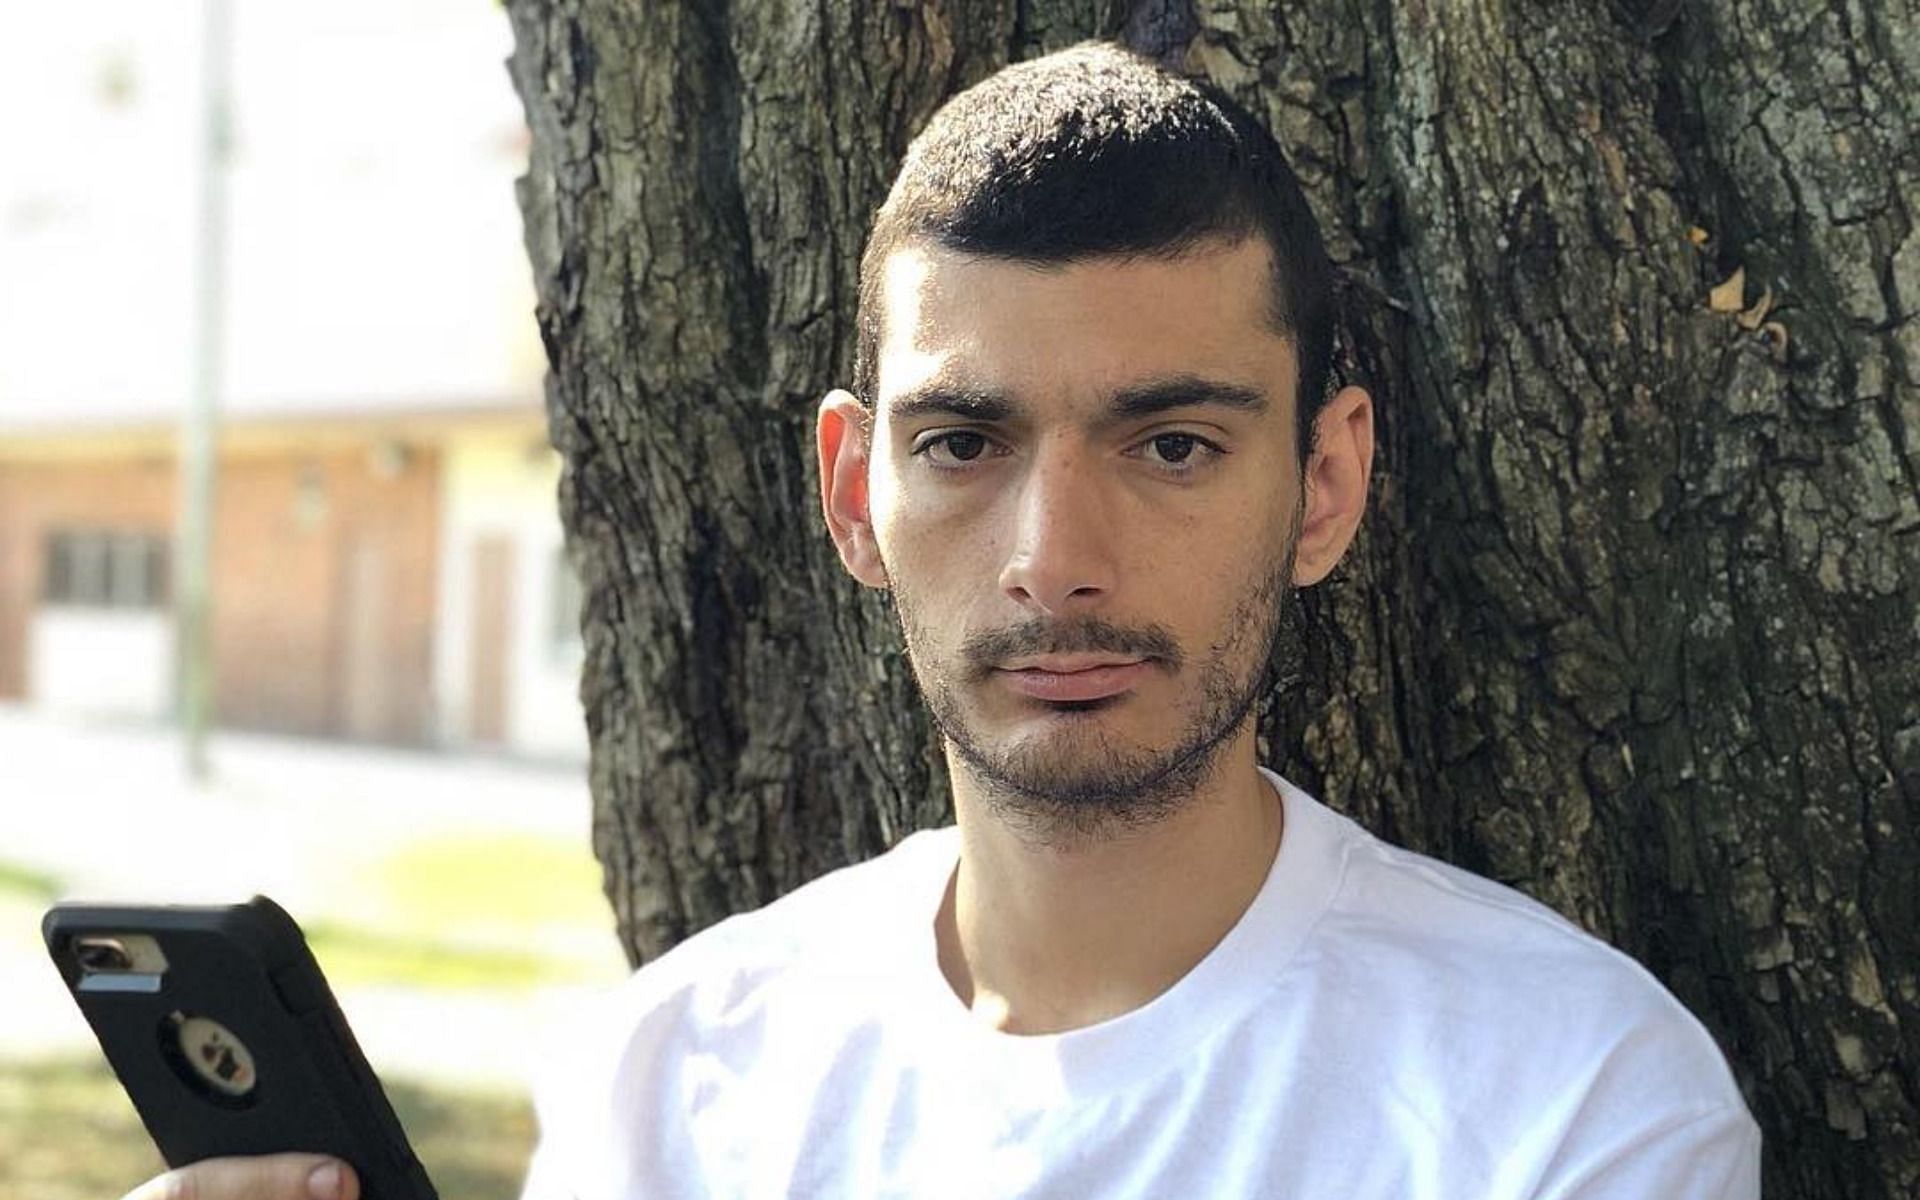 Ice Poseidon denies claims of scamming fans out of $500k, met with resistance (Image via ice_poseidon/Instagram)